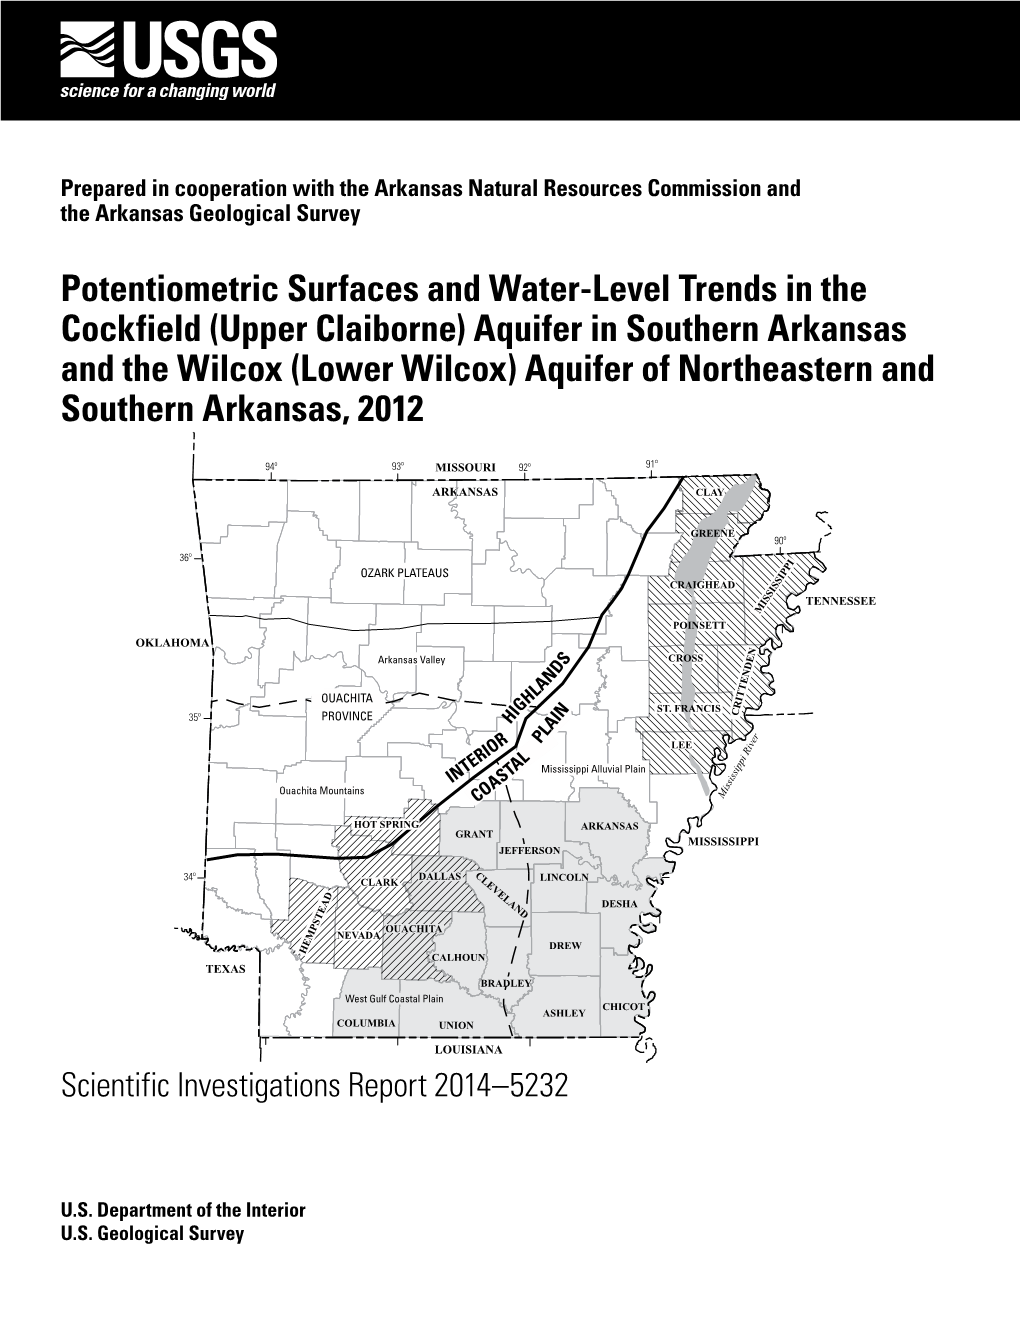 (Upper Claiborne) Aquifer in Southern Arkansas and the Wilcox (Lower Wilcox) Aquifer of Northeastern and Southern Arkansas, 2012